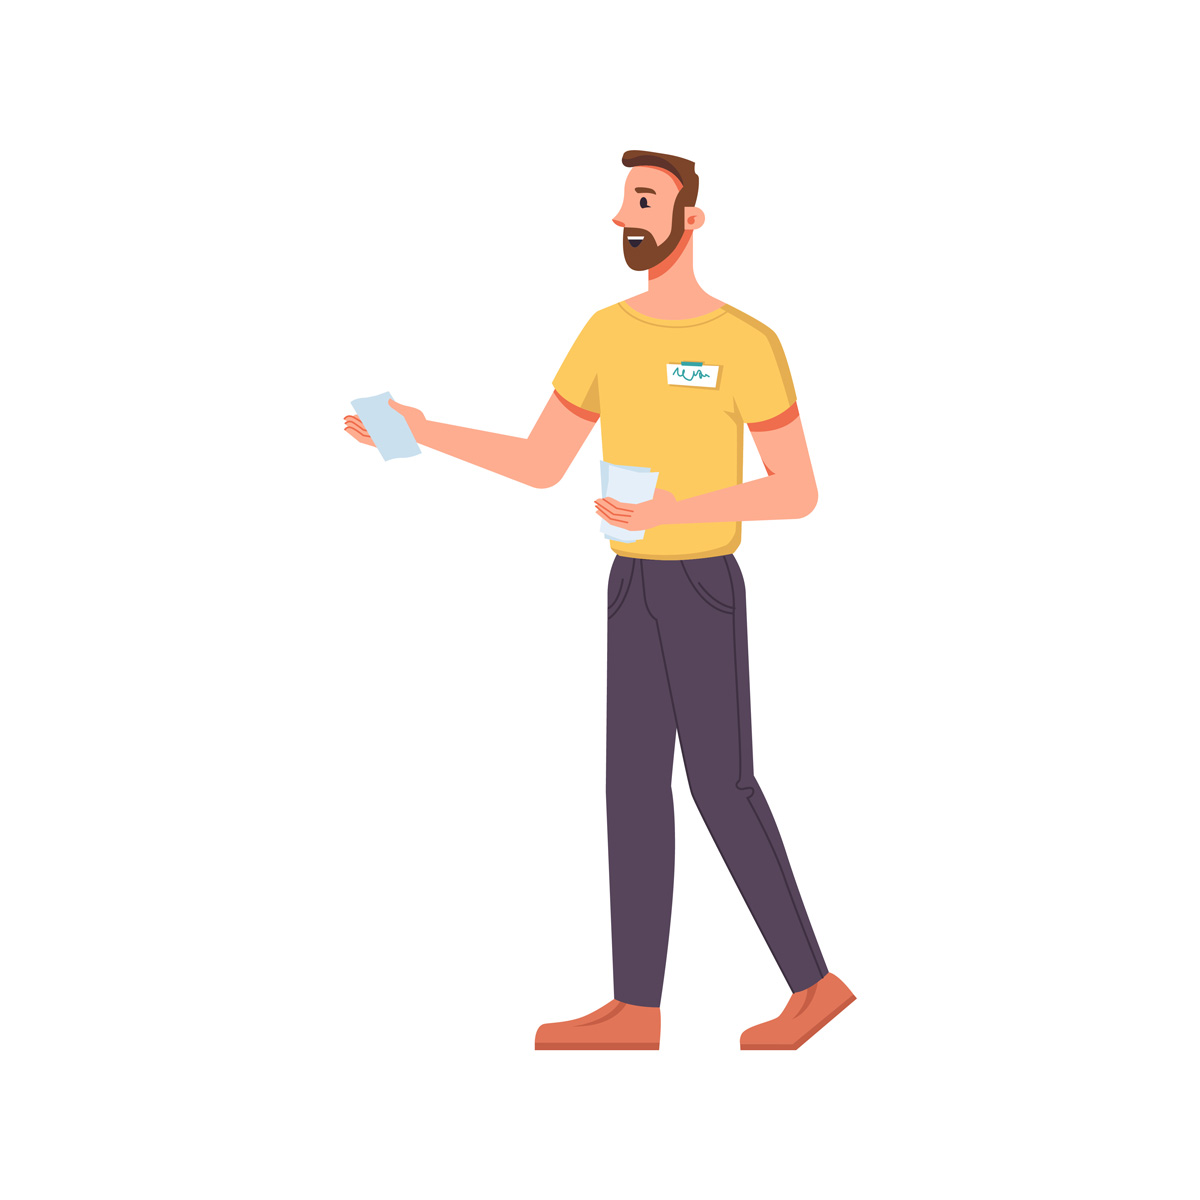 An illustration of a man in a yellow shirt passing out flyers in El Paso.